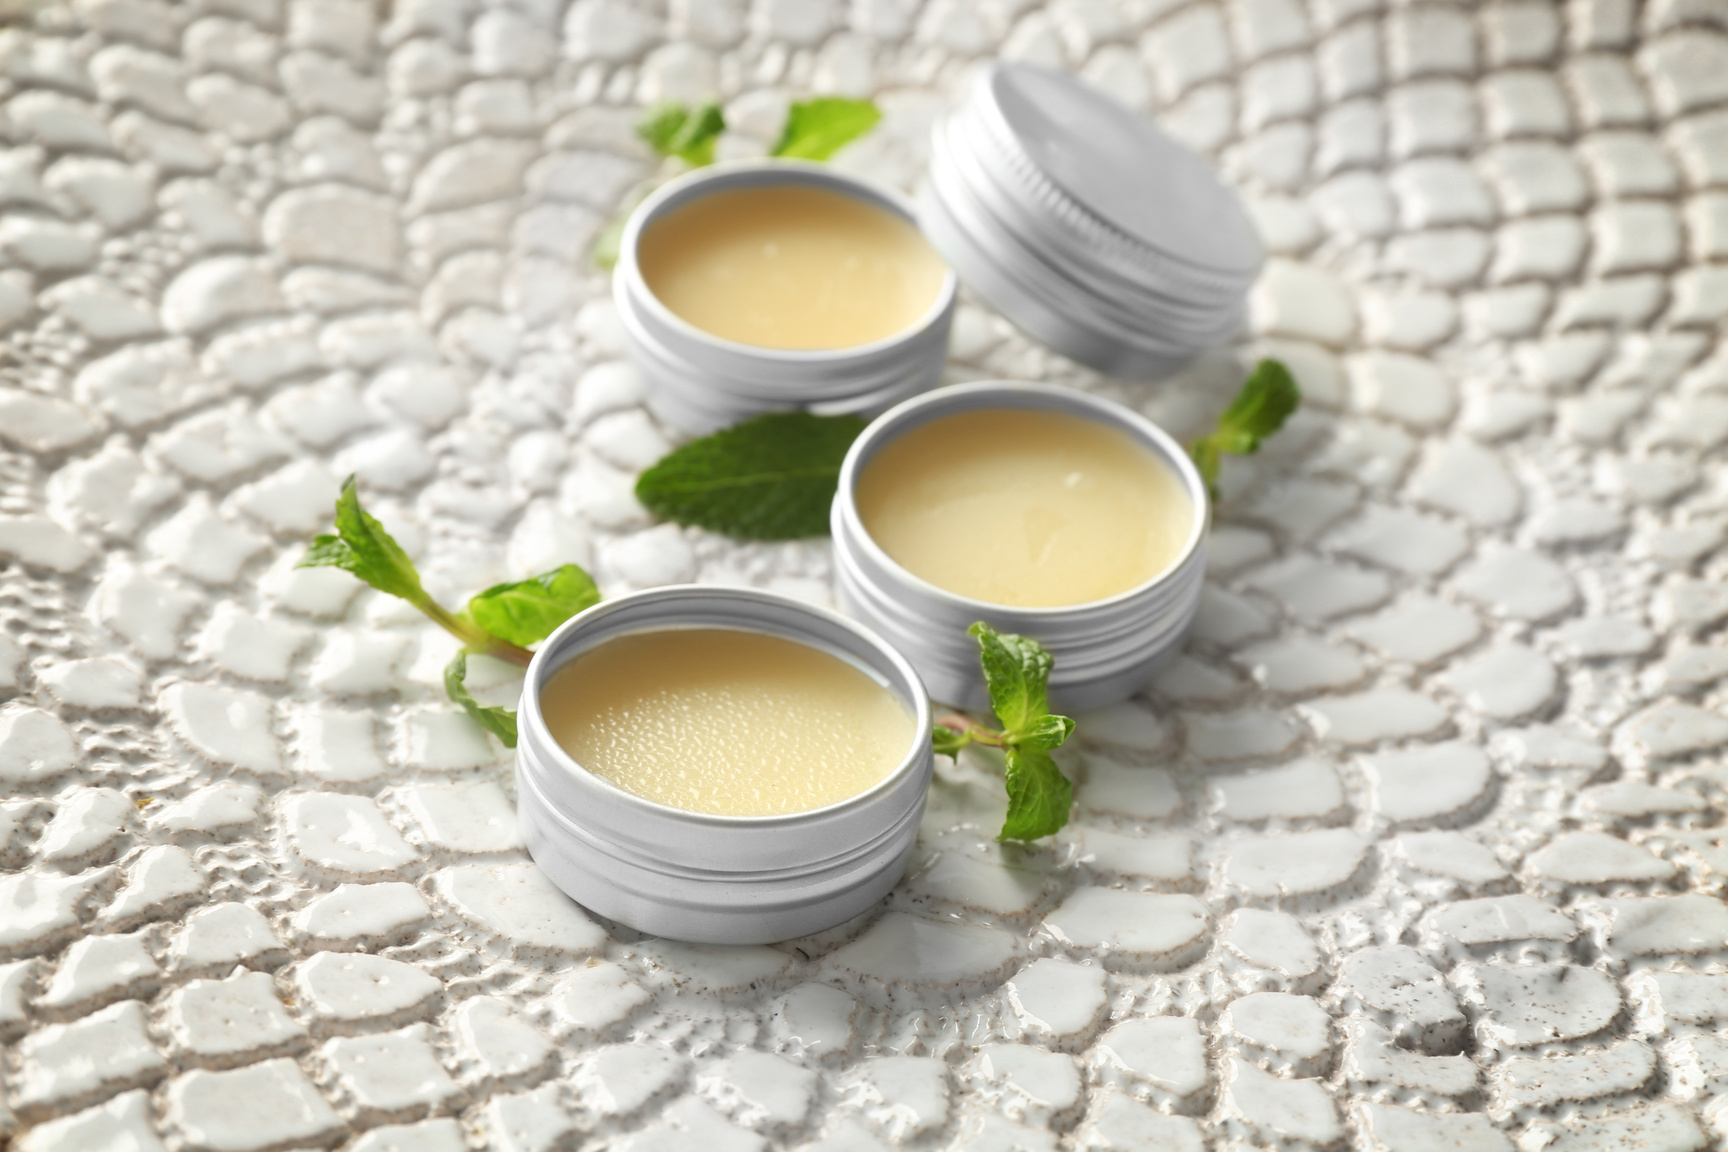 Containers with Lemon Balm Salve and Leaves on Textured Surface